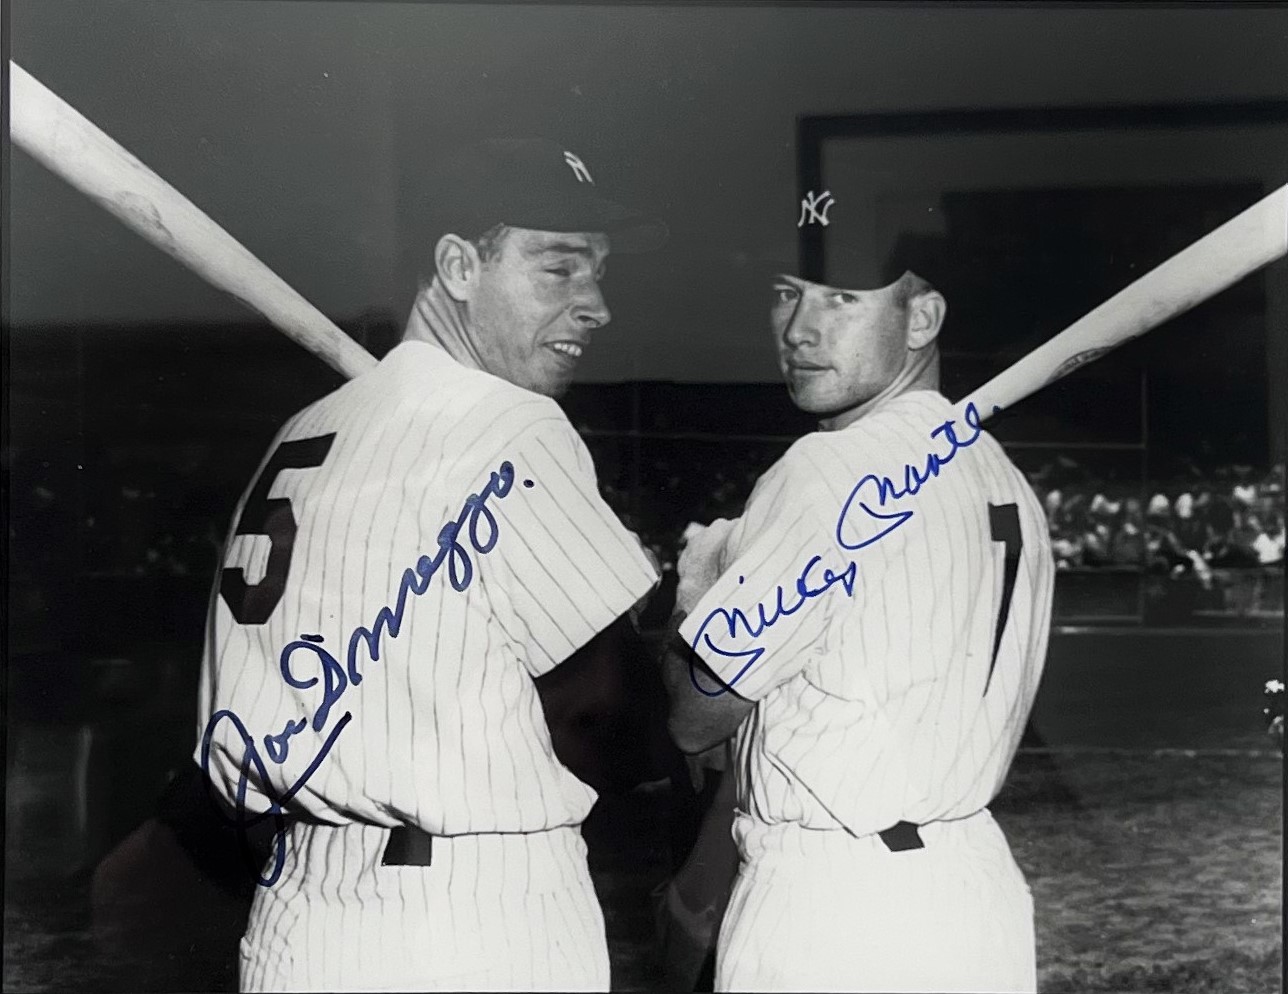 Signed Photograph of DiMaggio & Mantle, 1951 Season by [DiMaggio, Joe]; [ Mantle, Mickey].: Fine Photograph Signed